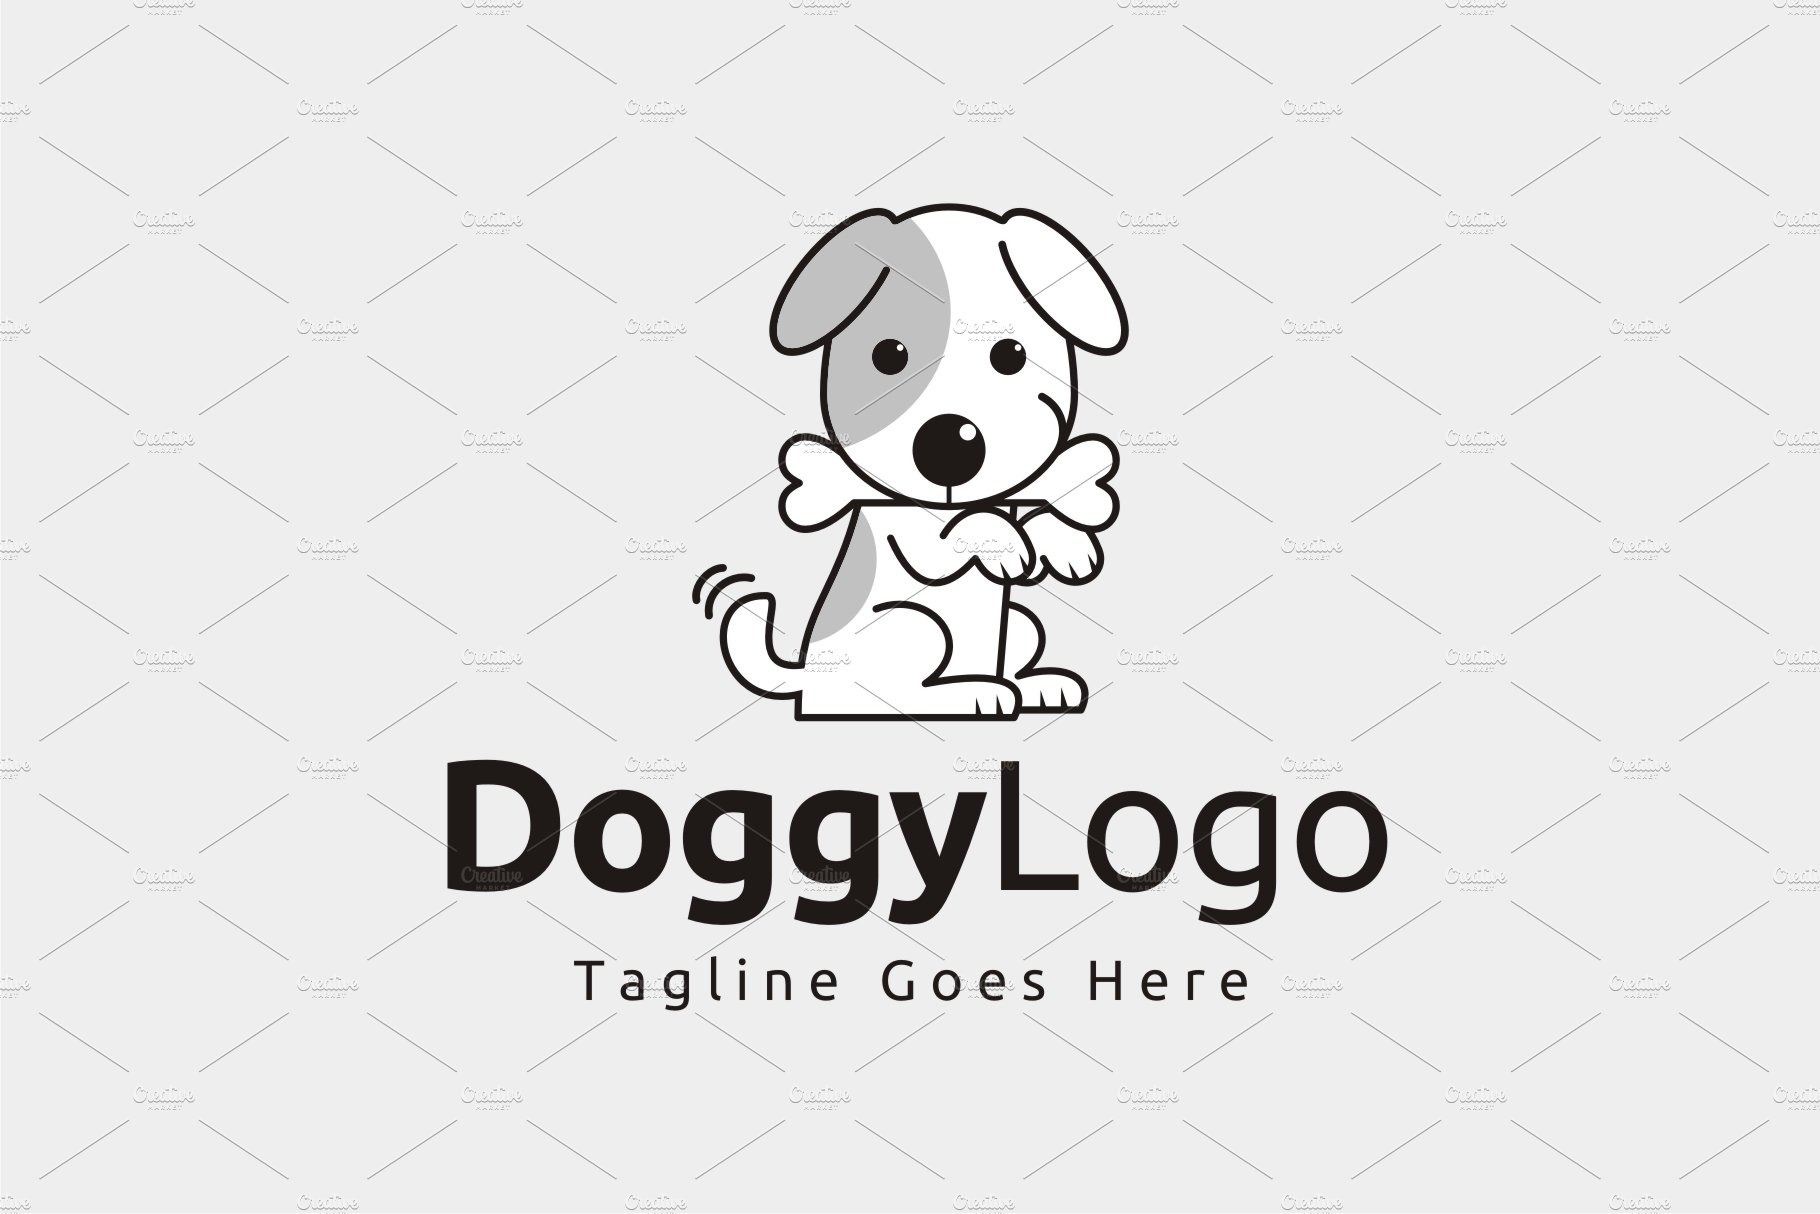 Doggy Logo preview image.